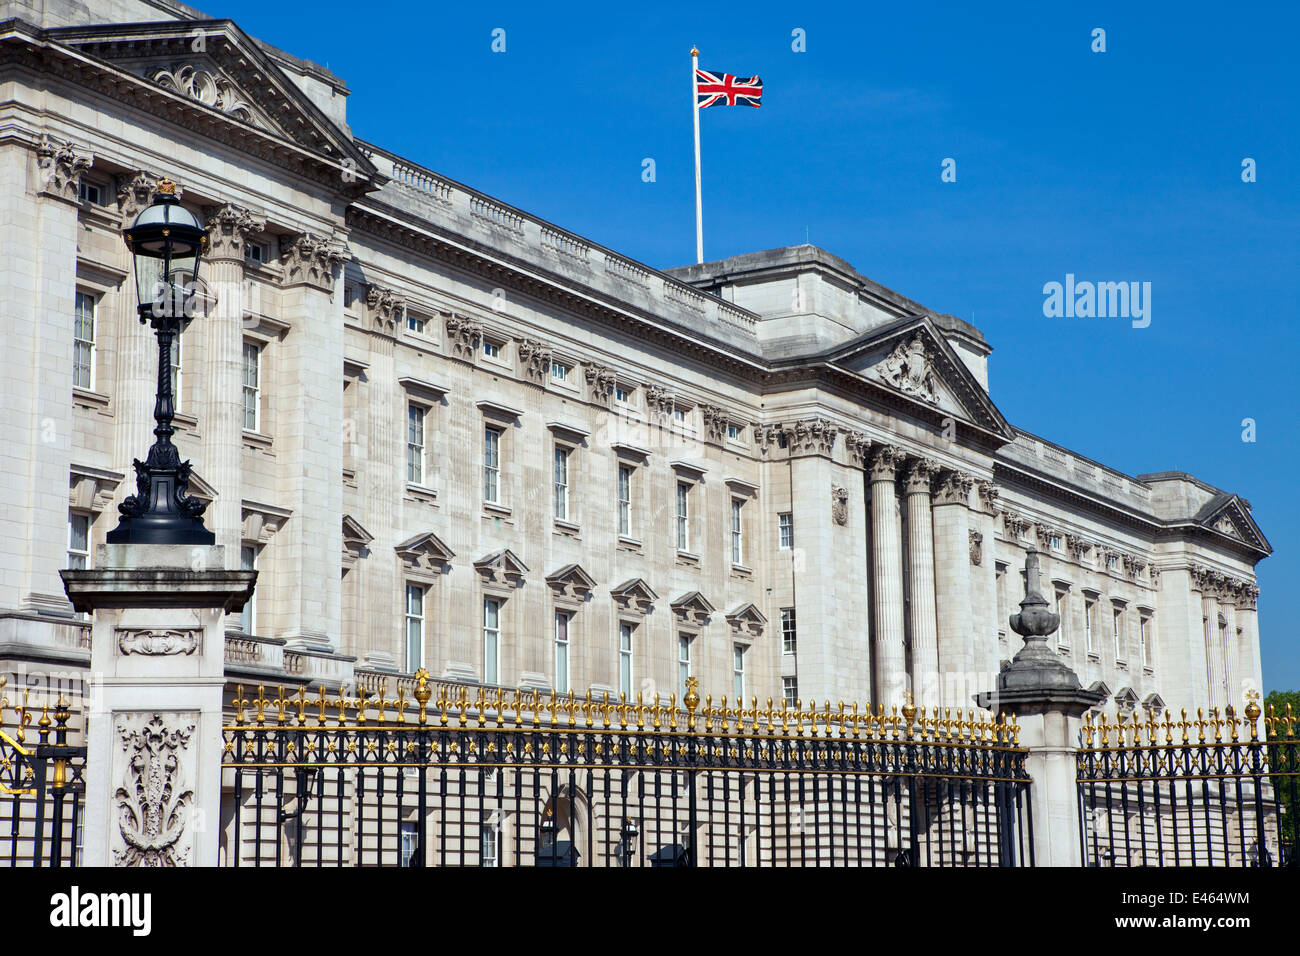 LONDON, UK - MAY 16TH 2014: The historic Buckingham Palace in London on 16th May 2014. Stock Photo